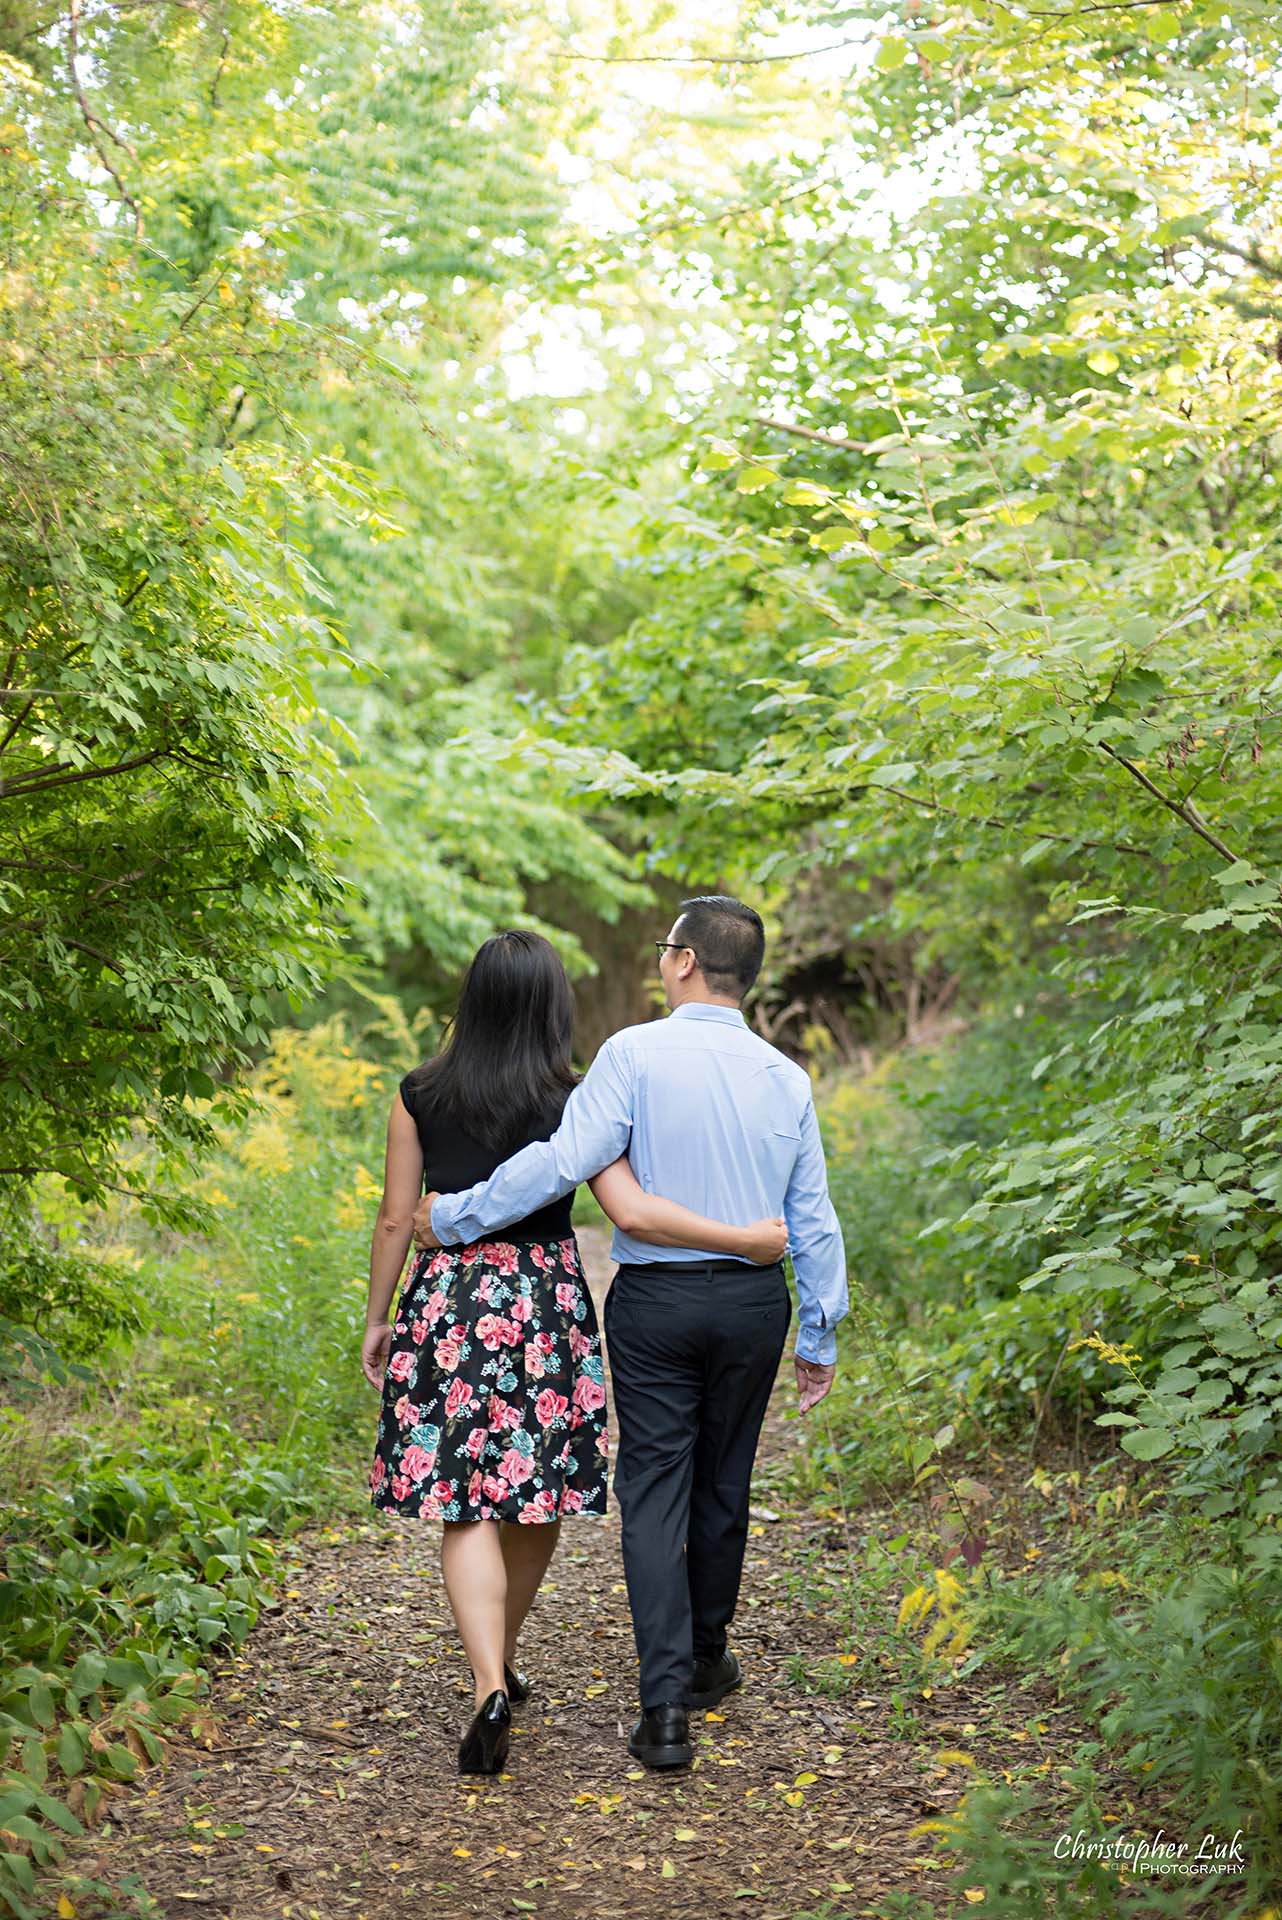 Christopher Luk Toronto Wedding Family Event Corporate Commercial Headshot Photographer Edith Jeff Engagement Session Alexander Muir Memorial Gardens Park MidTown Photo Location Natural Candid Photojournalistic - Bride and Groom Walking Forest Pathway Hug Waist